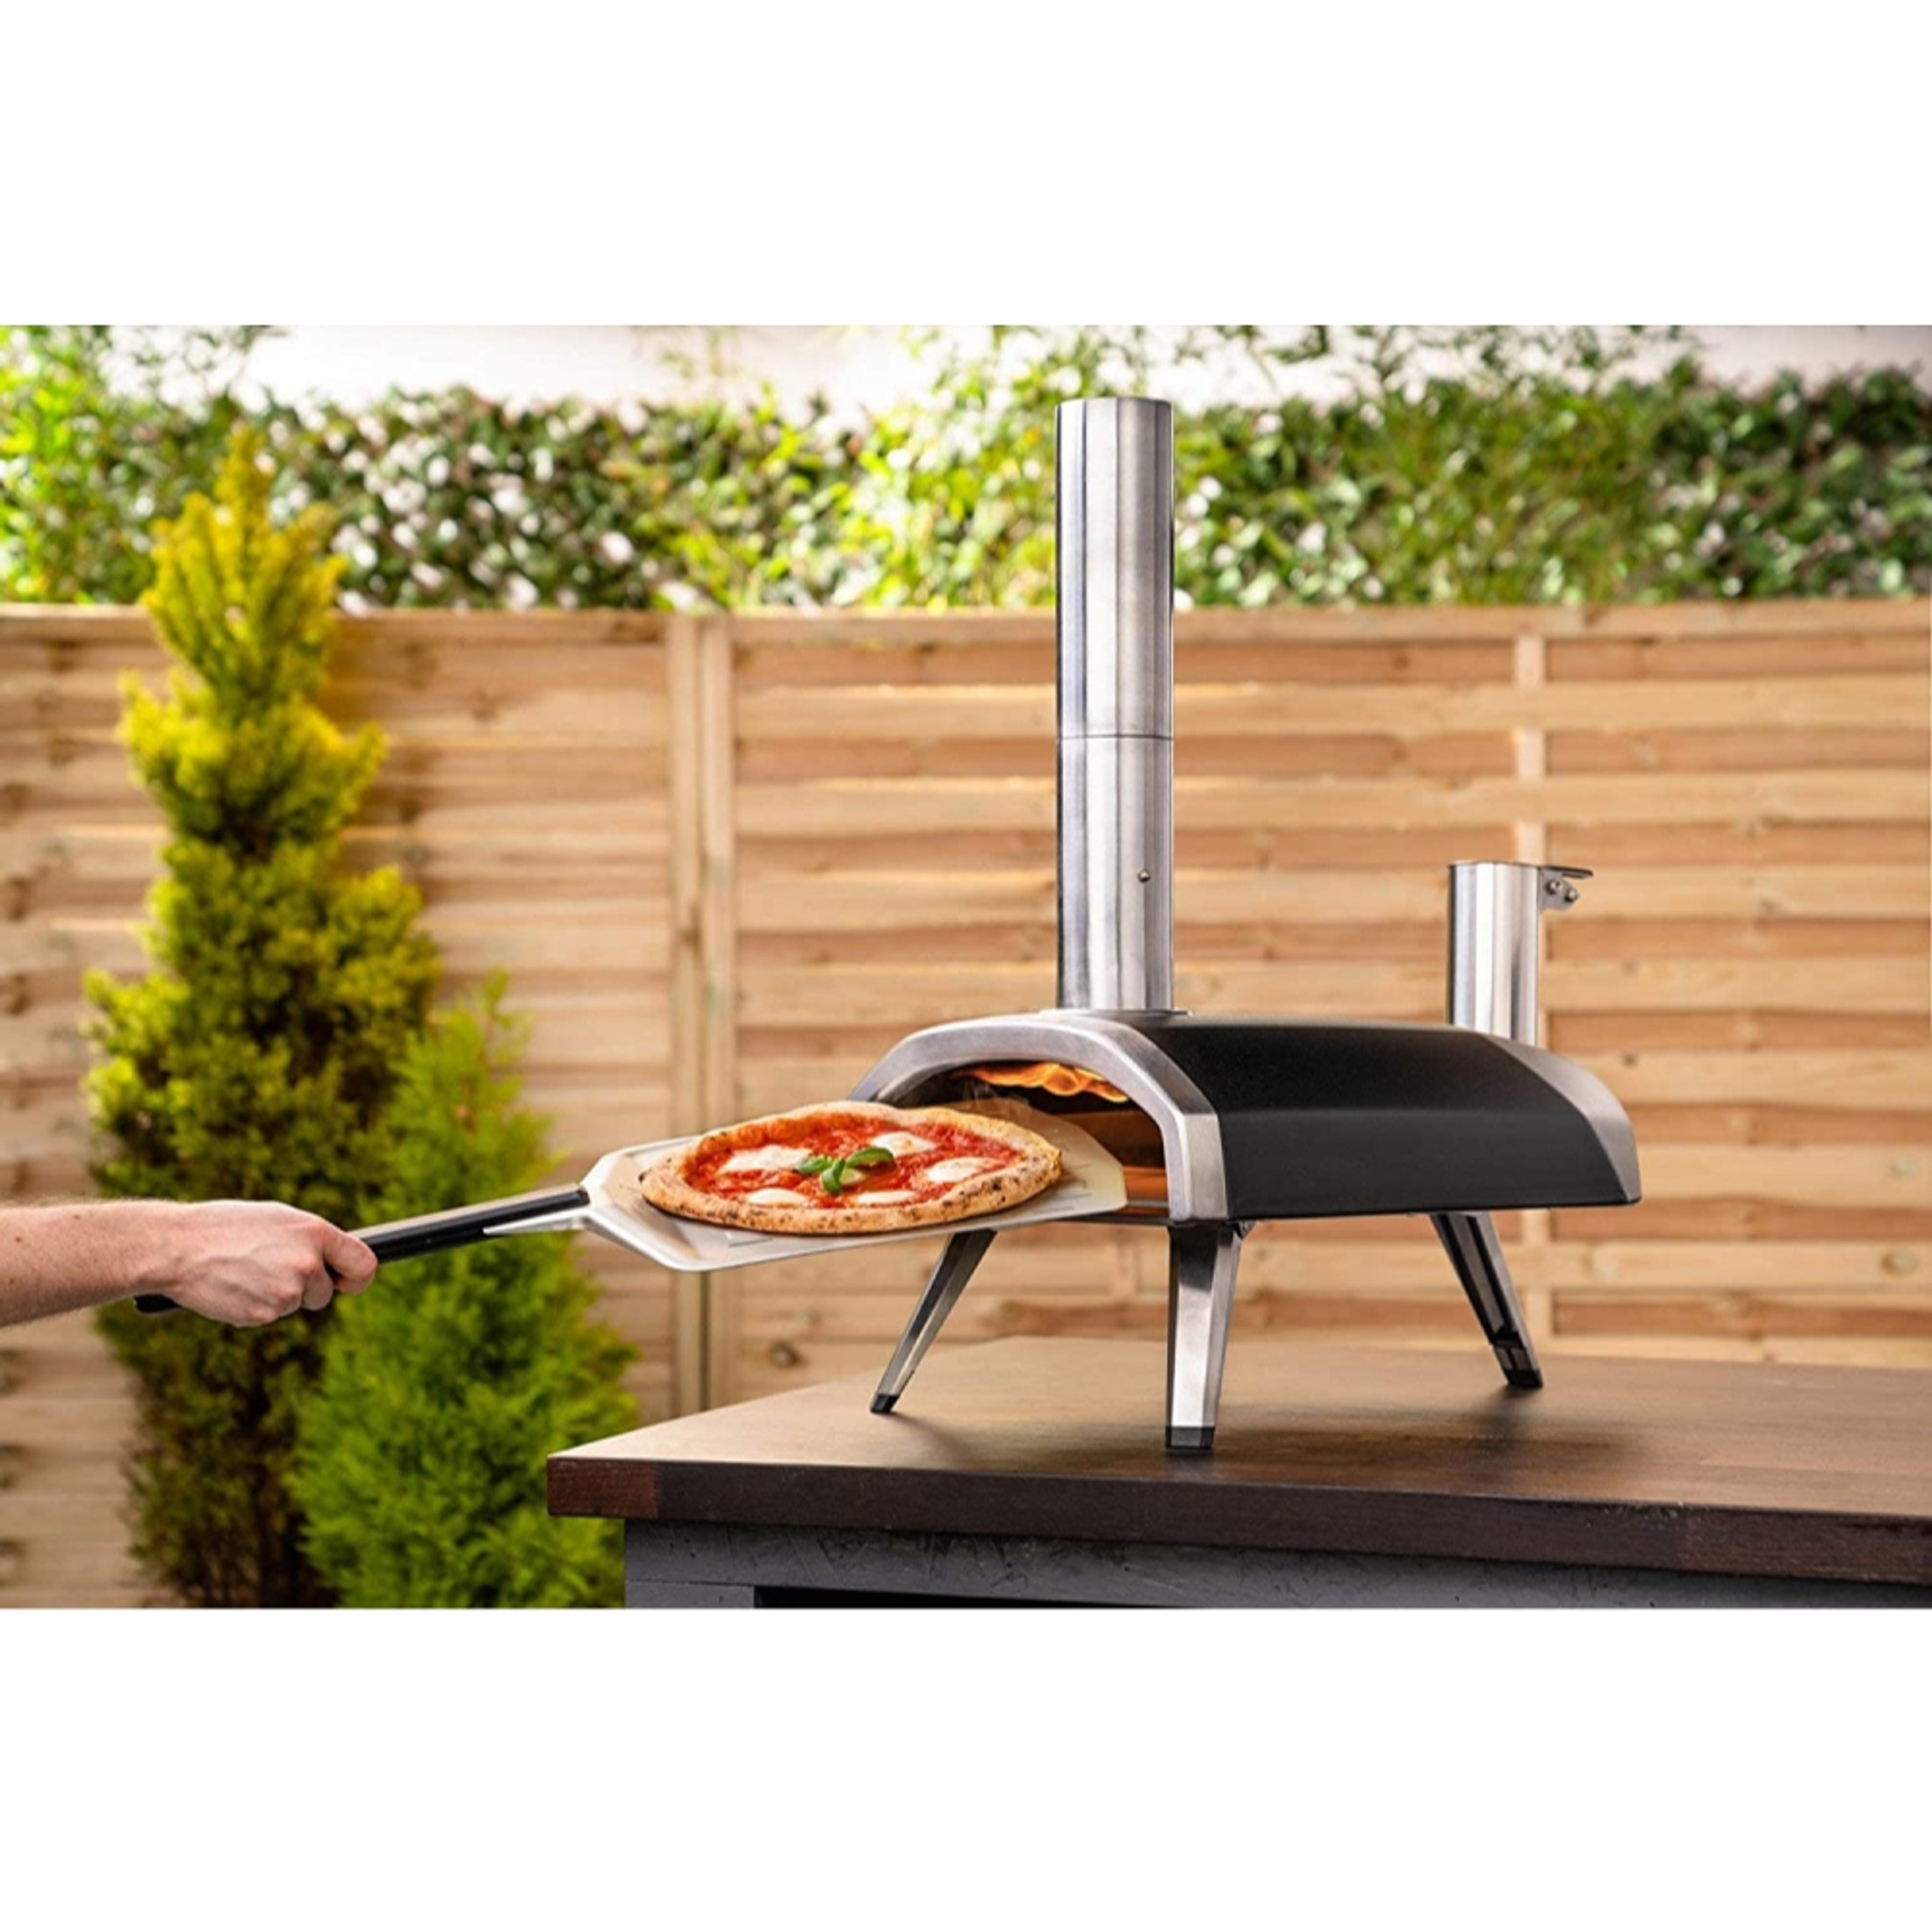 Ooni Fyra 12 Wood Fired Outdoor Pizza Oven ????? Portable Hard Wood Pellet Pizza Oven, DAMAGED BOX